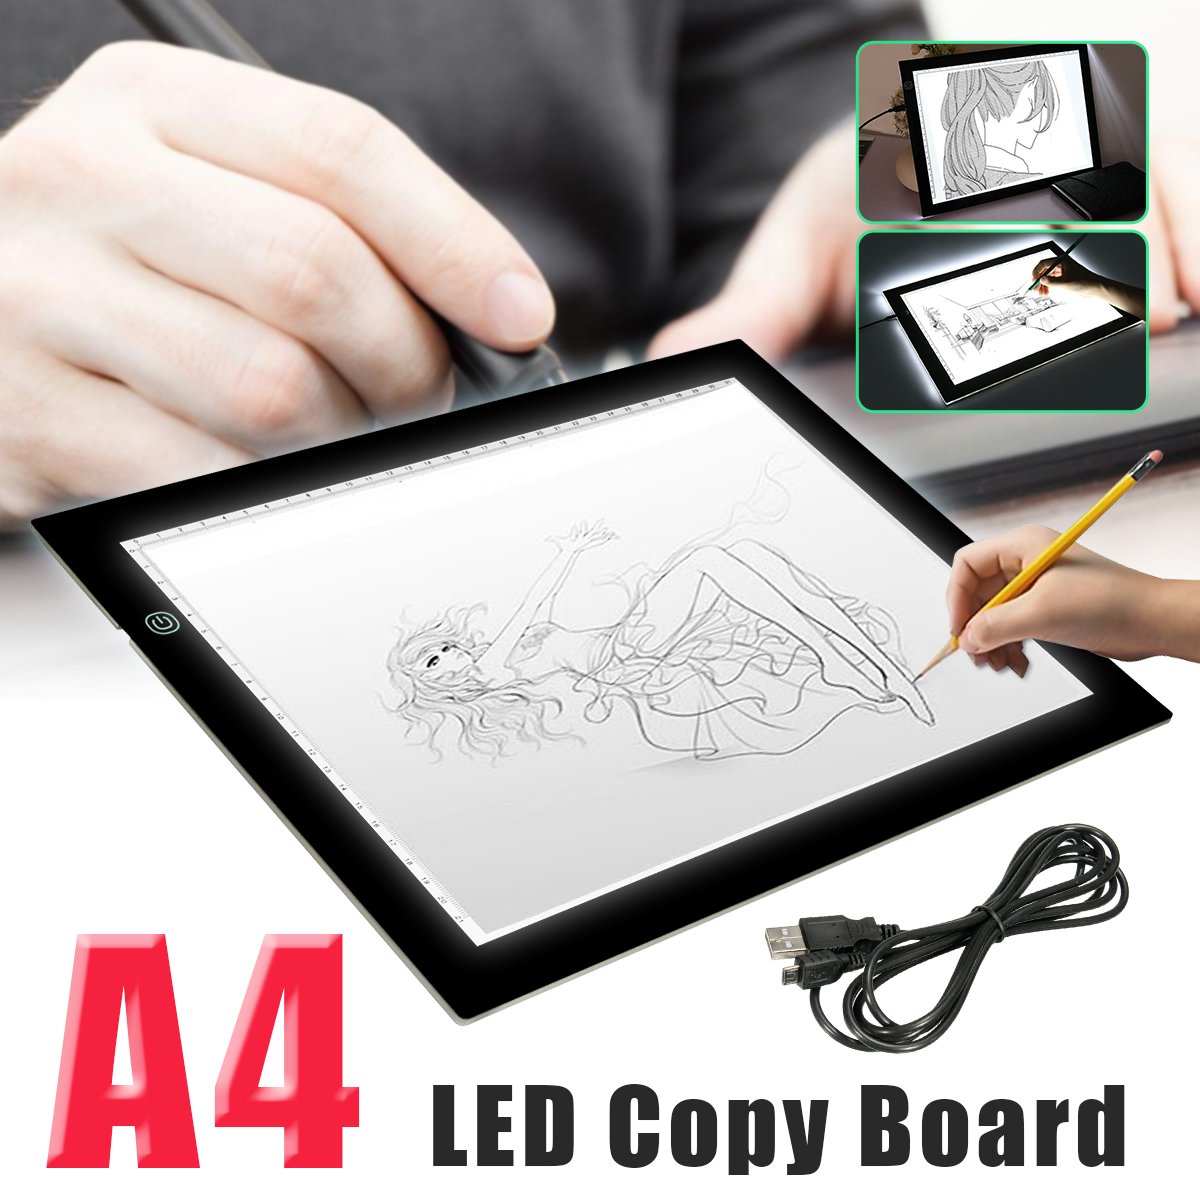 Digital Drawing Graphic Tablet | LED Light Box Tracing | Copy Board Painting 2